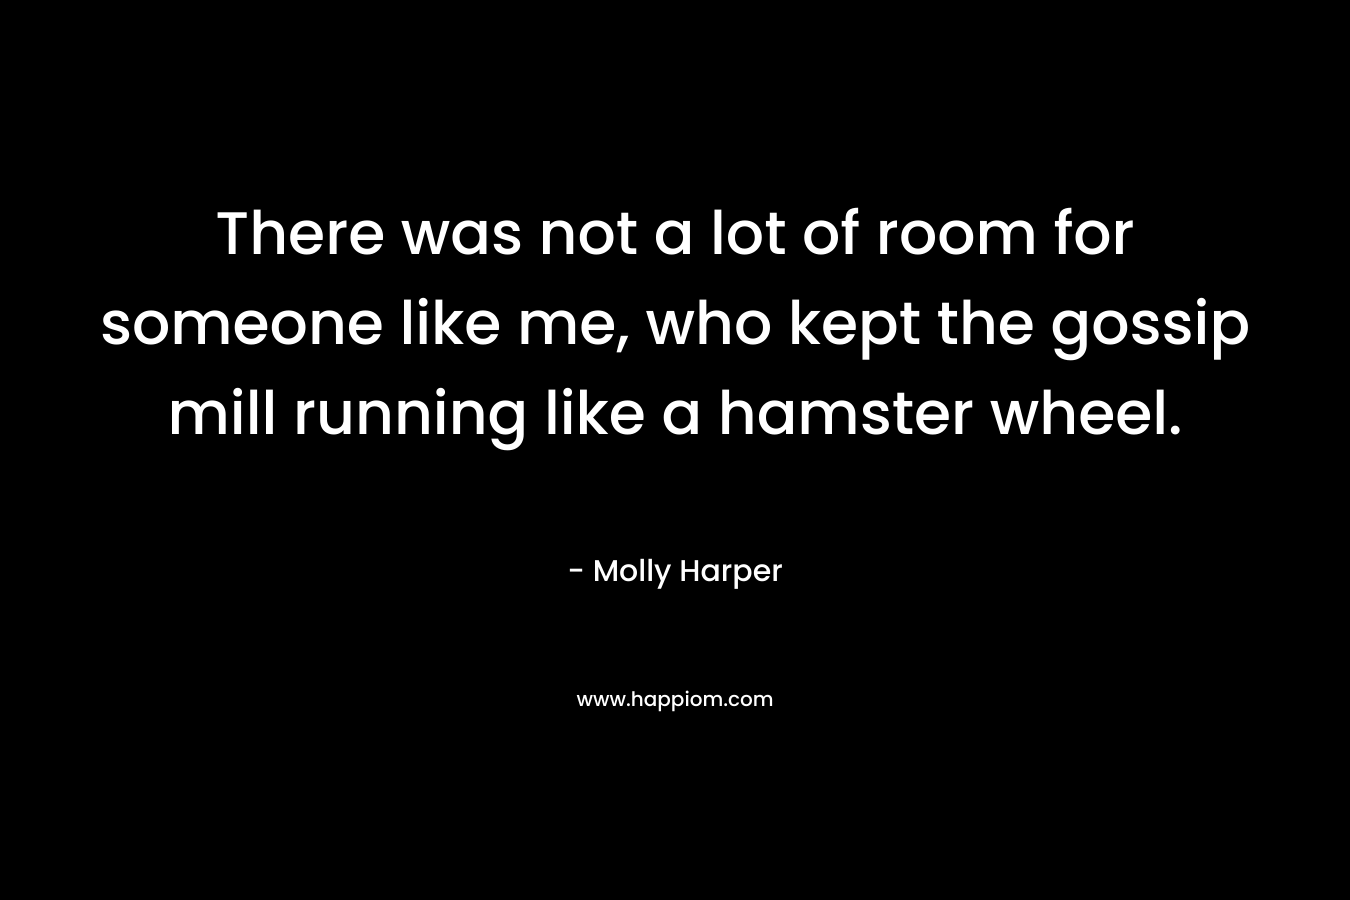 There was not a lot of room for someone like me, who kept the gossip mill running like a hamster wheel.